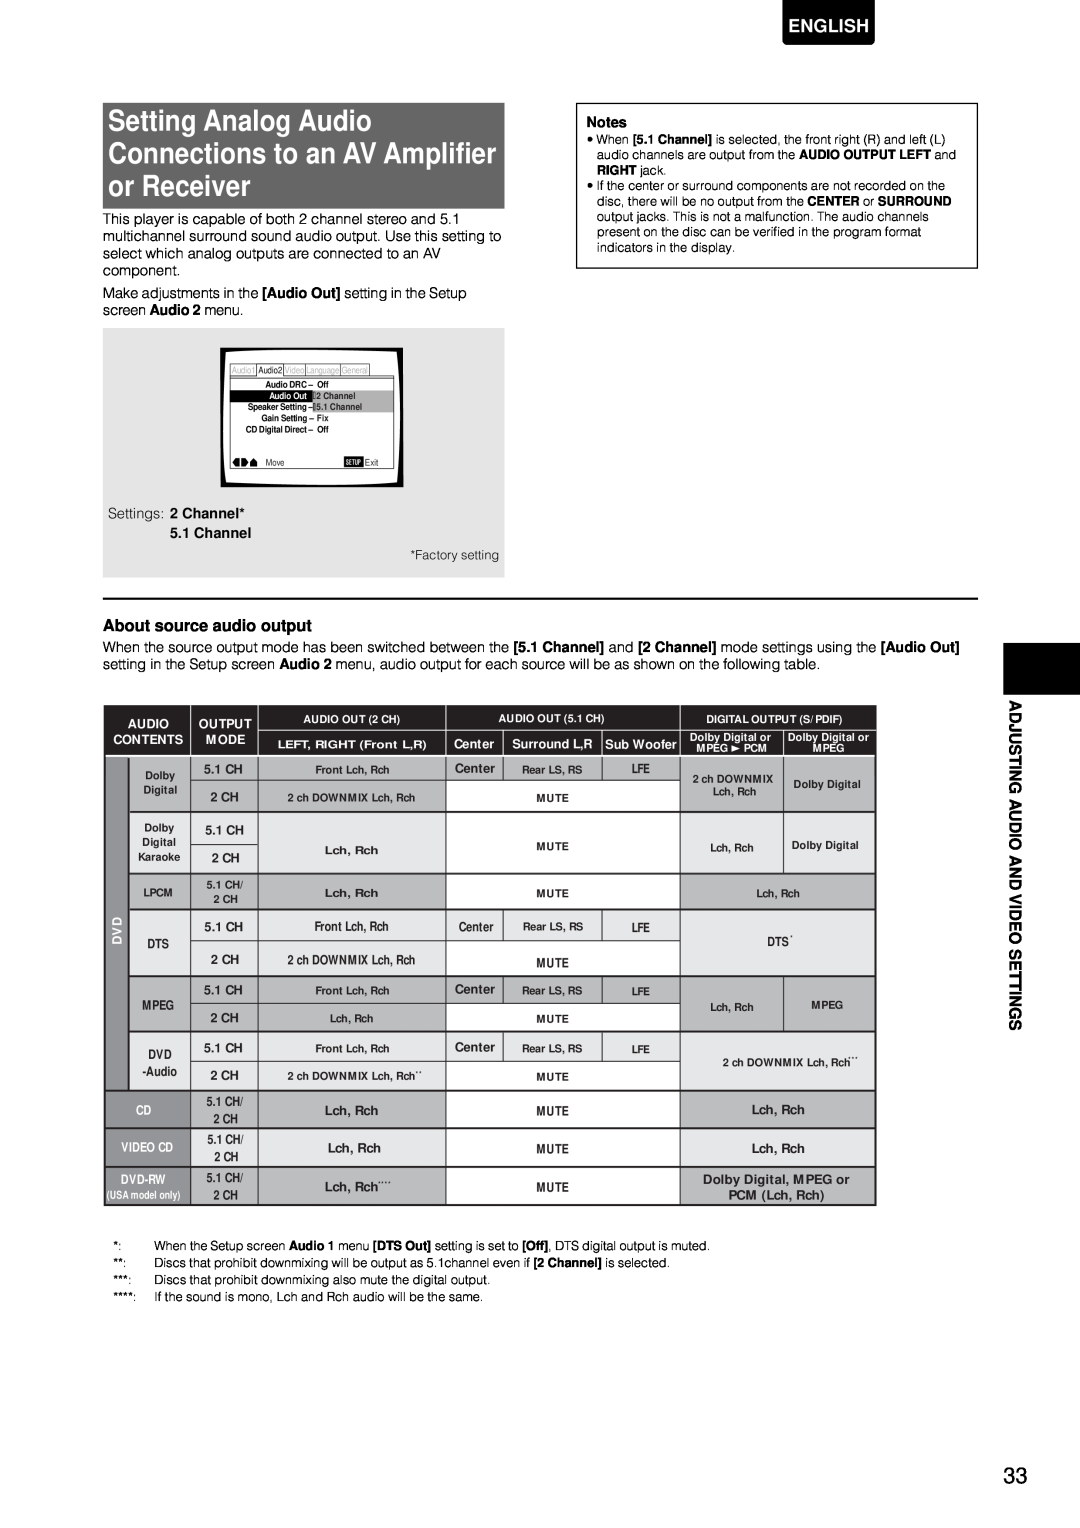 Marantz DV-12S1 manual Setting Analog Audio Connections to an AV Amplifier or Receiver, About source audio output, English 